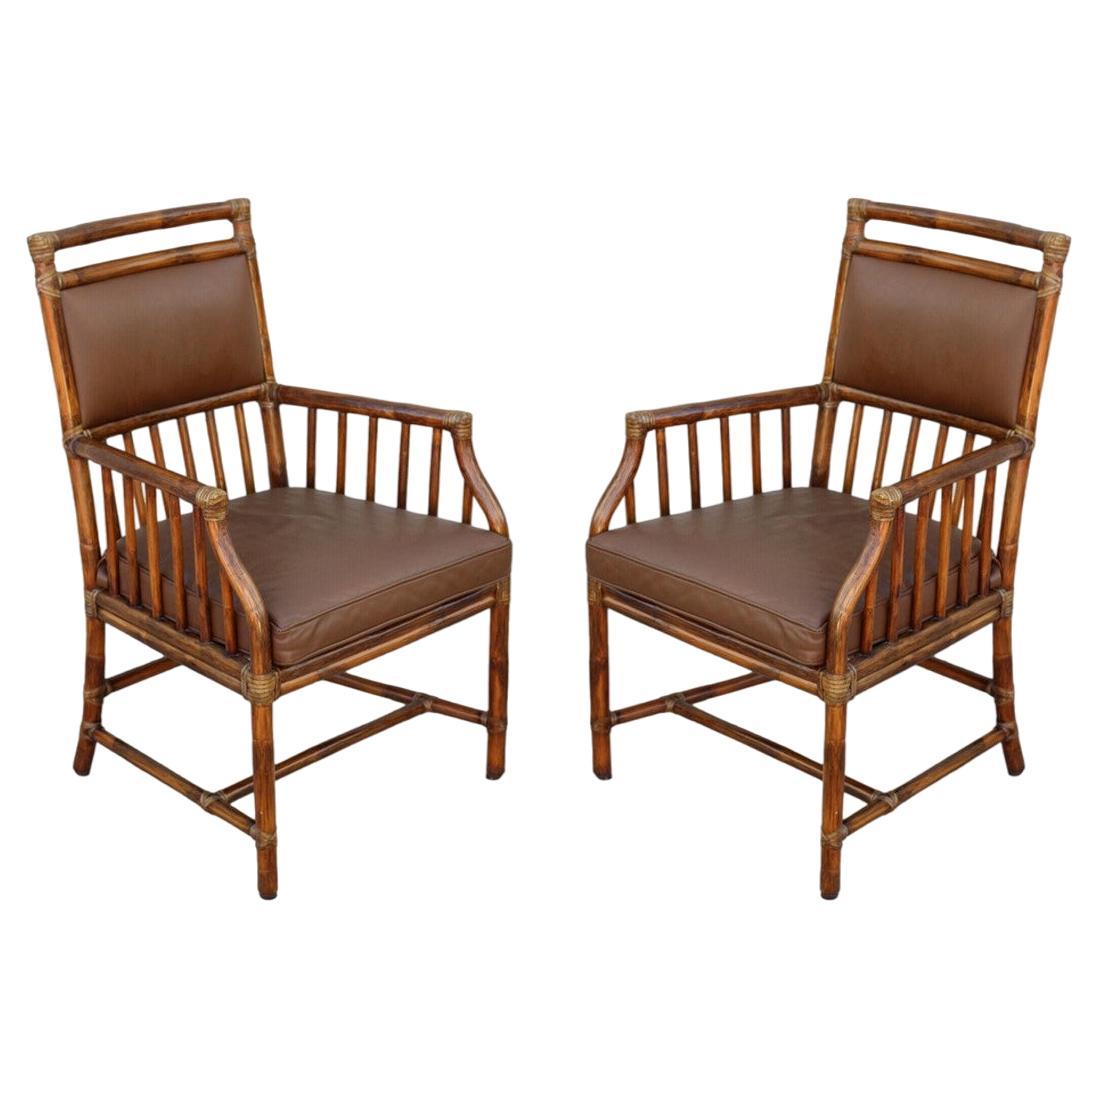 Andrew Delfino for McGuire Rattan and Leather Armchairs or Dining Chairs, a Pair For Sale